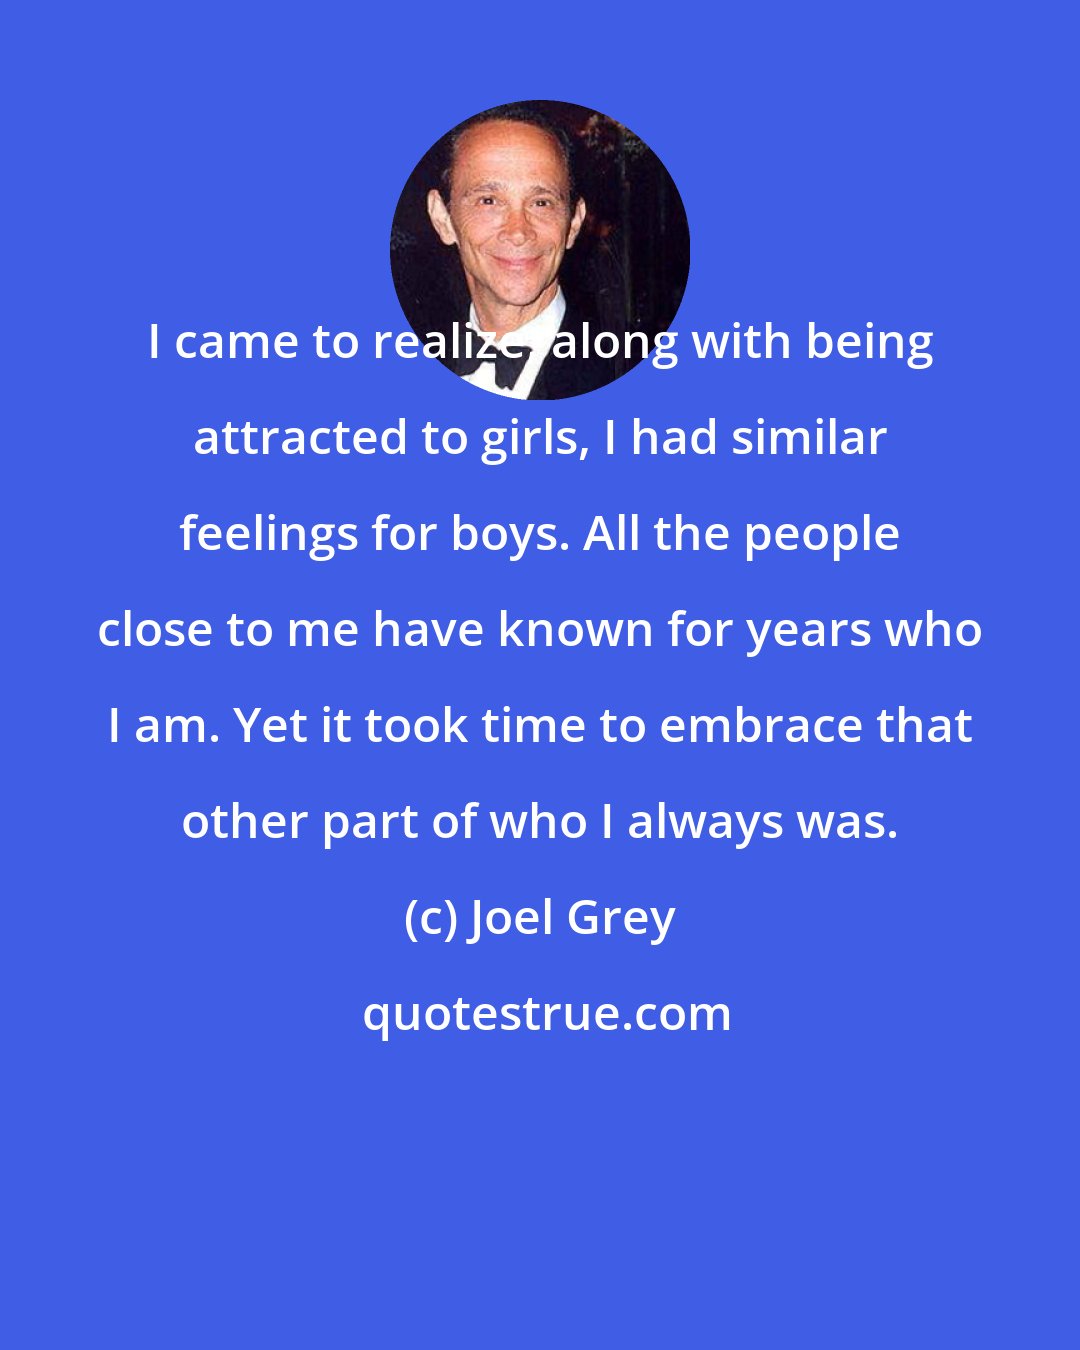 Joel Grey: I came to realize, along with being attracted to girls, I had similar feelings for boys. All the people close to me have known for years who I am. Yet it took time to embrace that other part of who I always was.